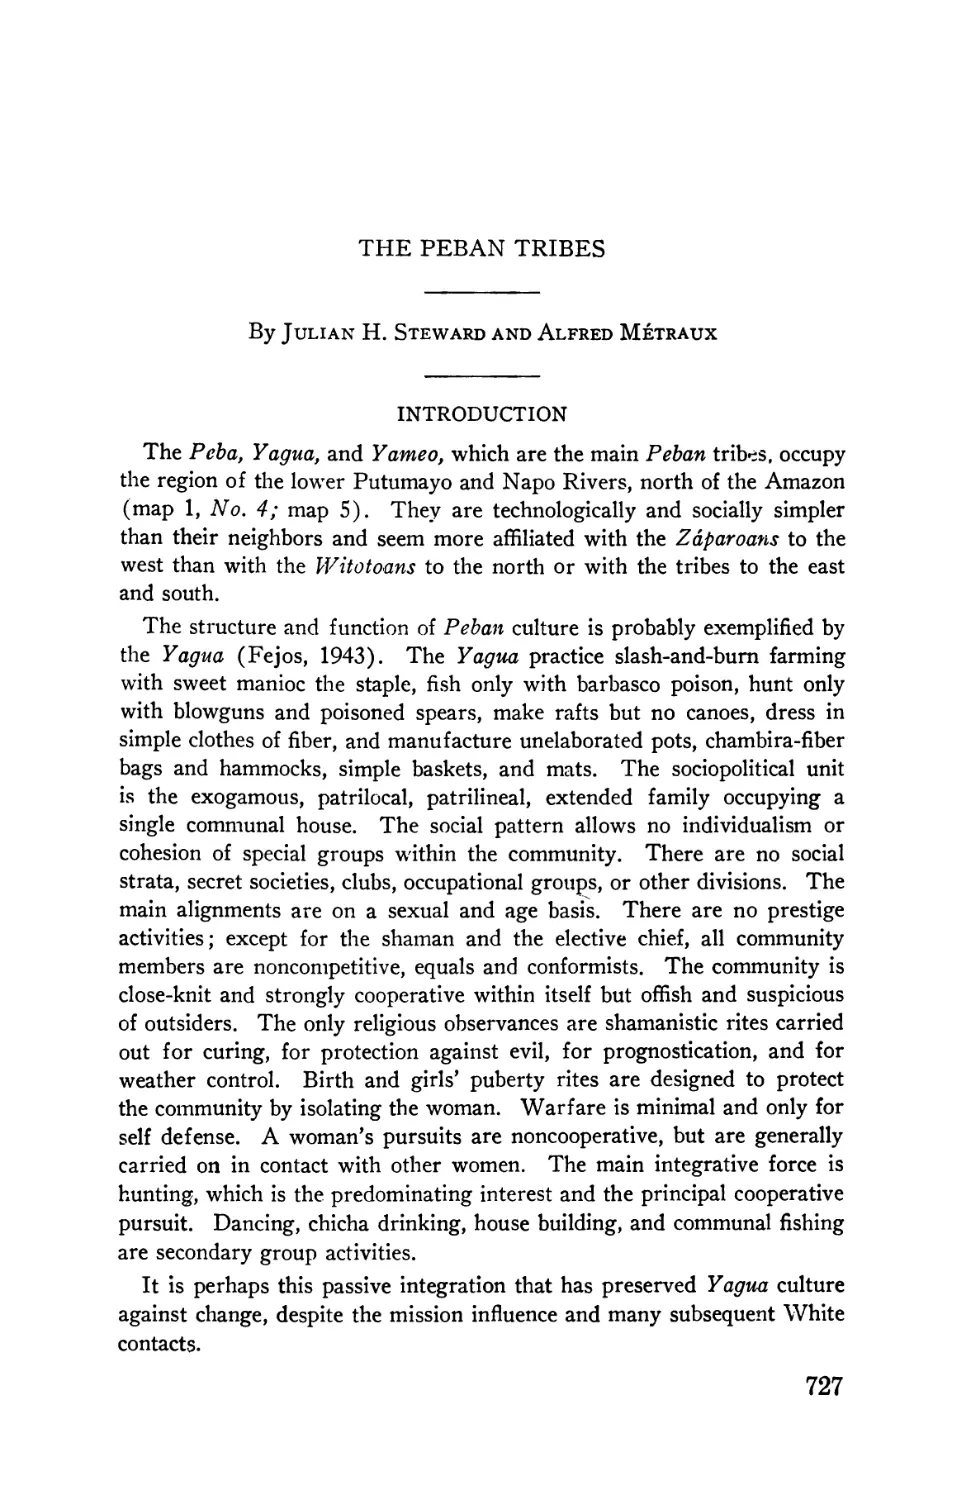 The Peban tribes, by Julian H. Steward and Alfred Métraux
Tribal divisions and history